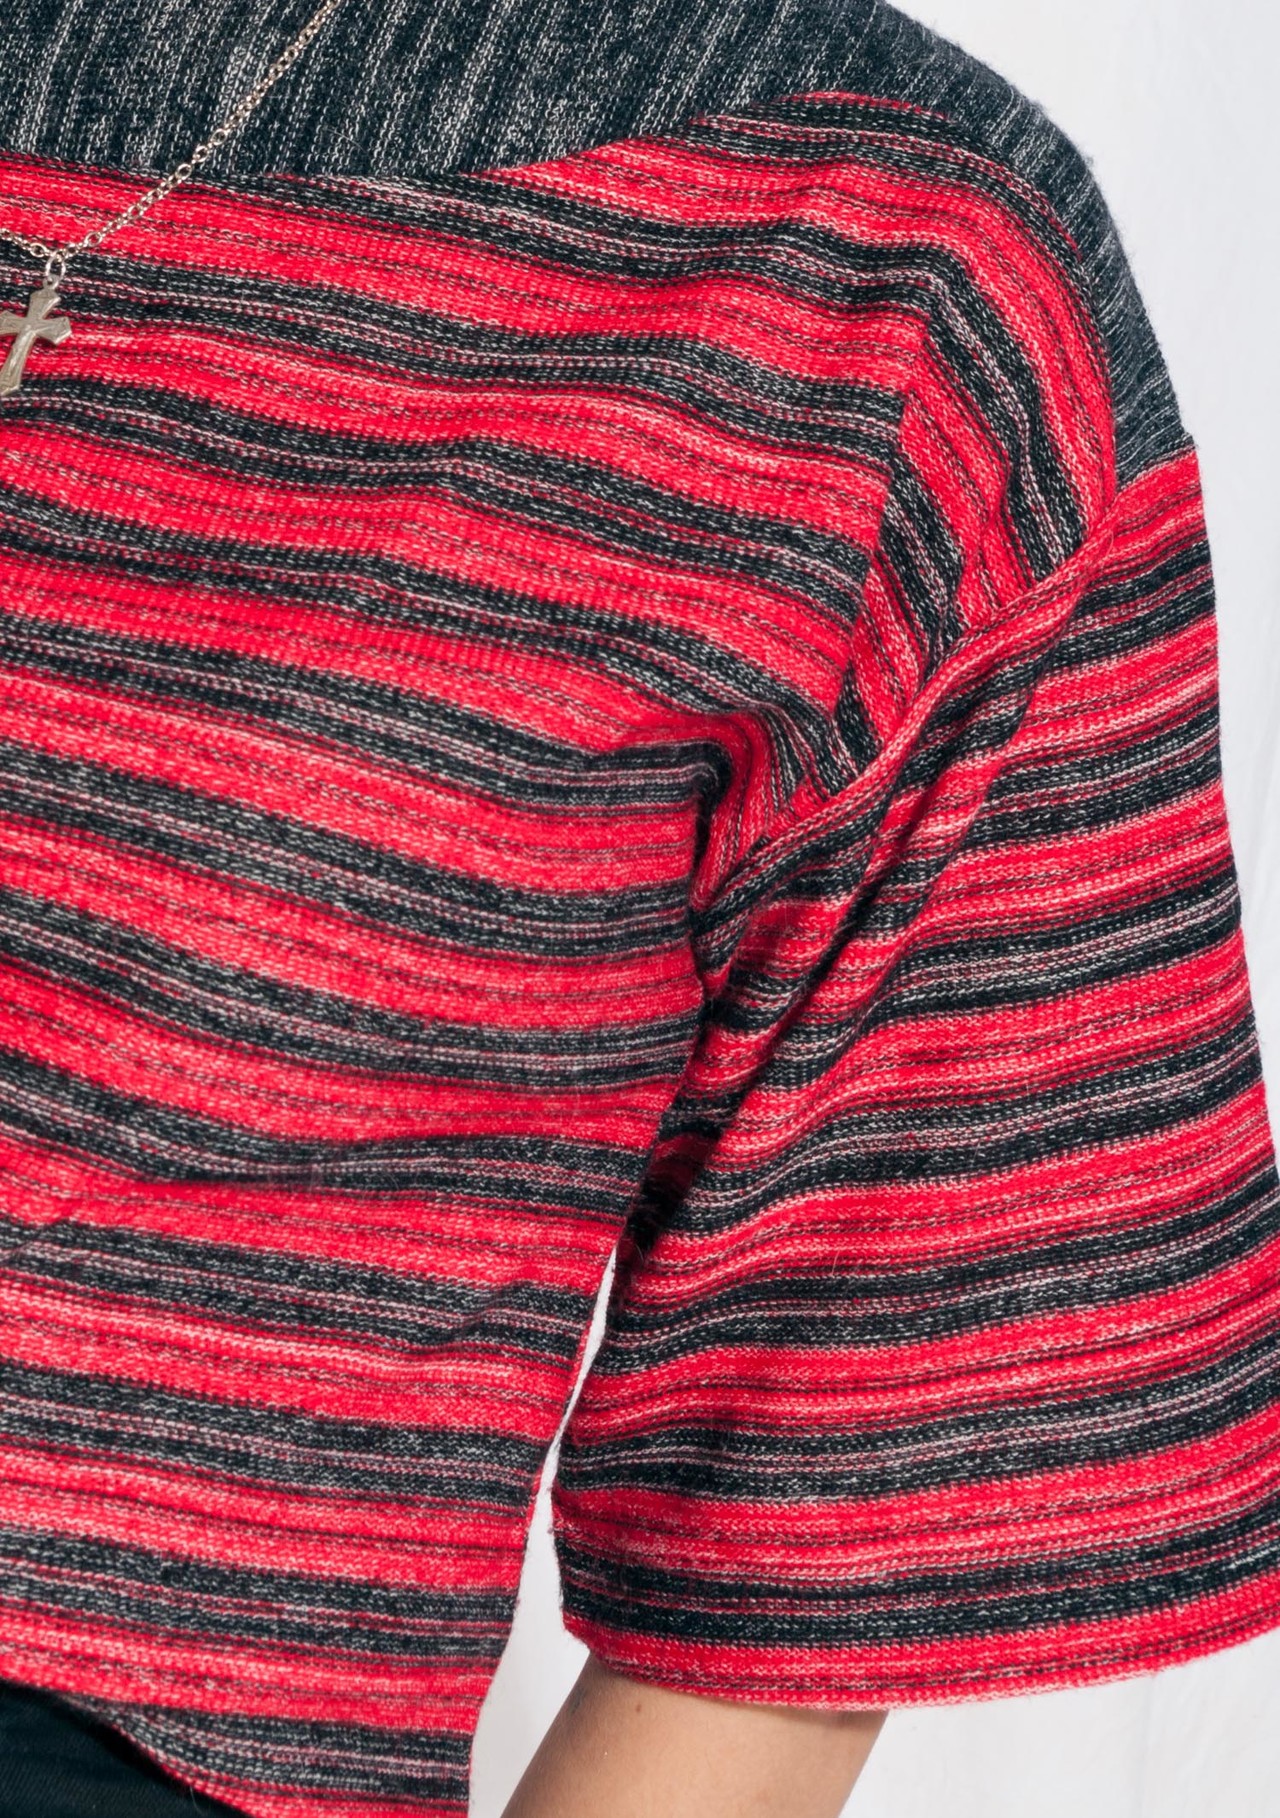 Vintage knit jumper 70s striped flare sleeve red sweater top – Pop Sick ...